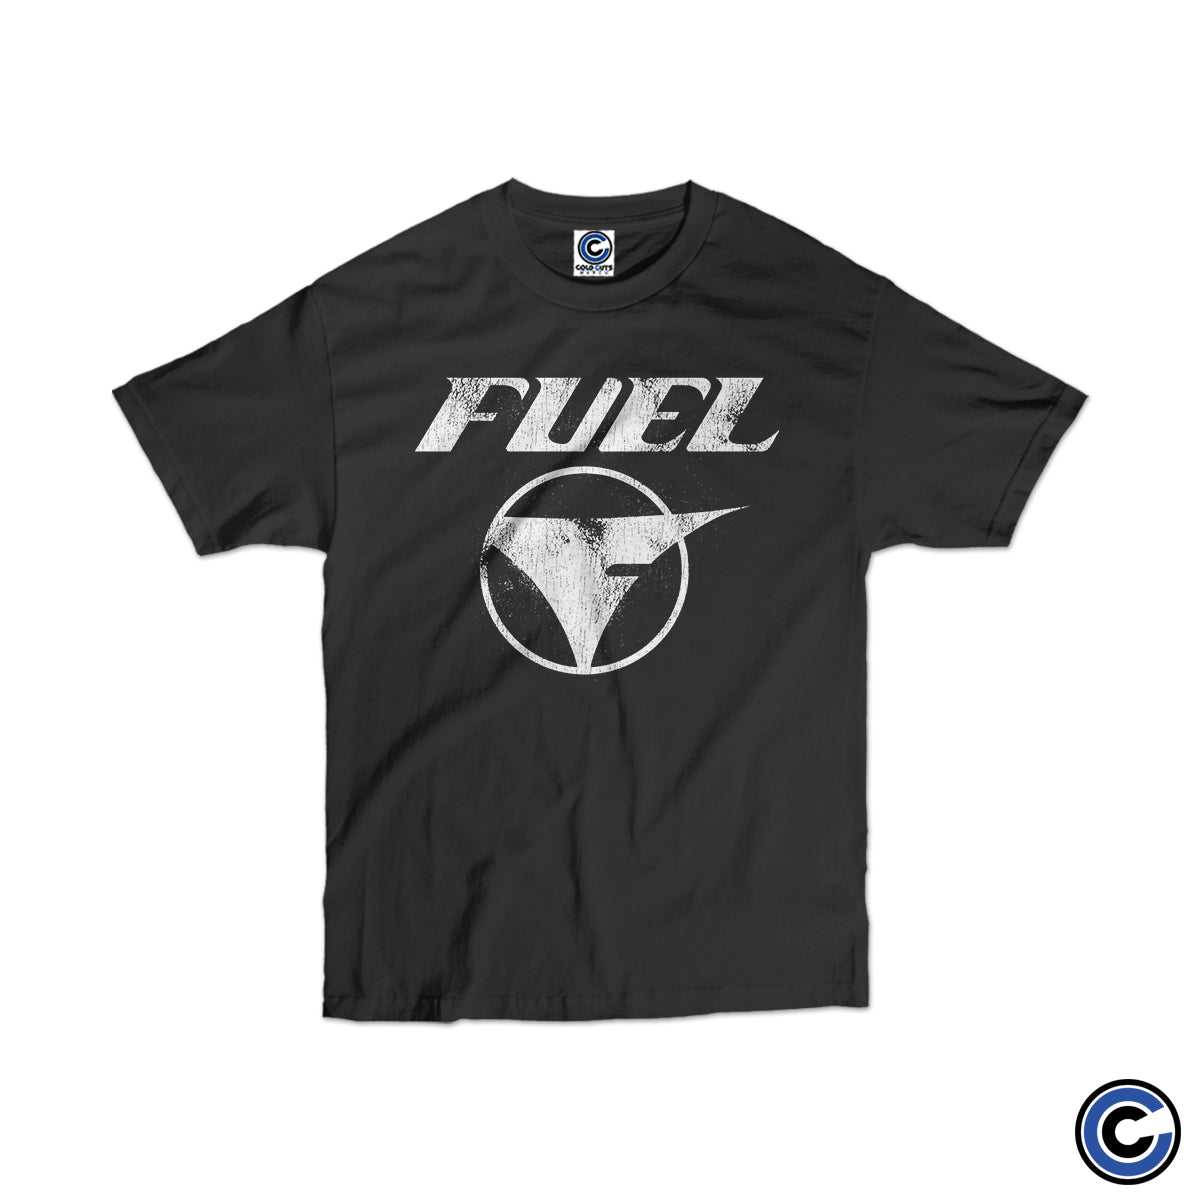 Fuel "Vintage" Youth Shirt